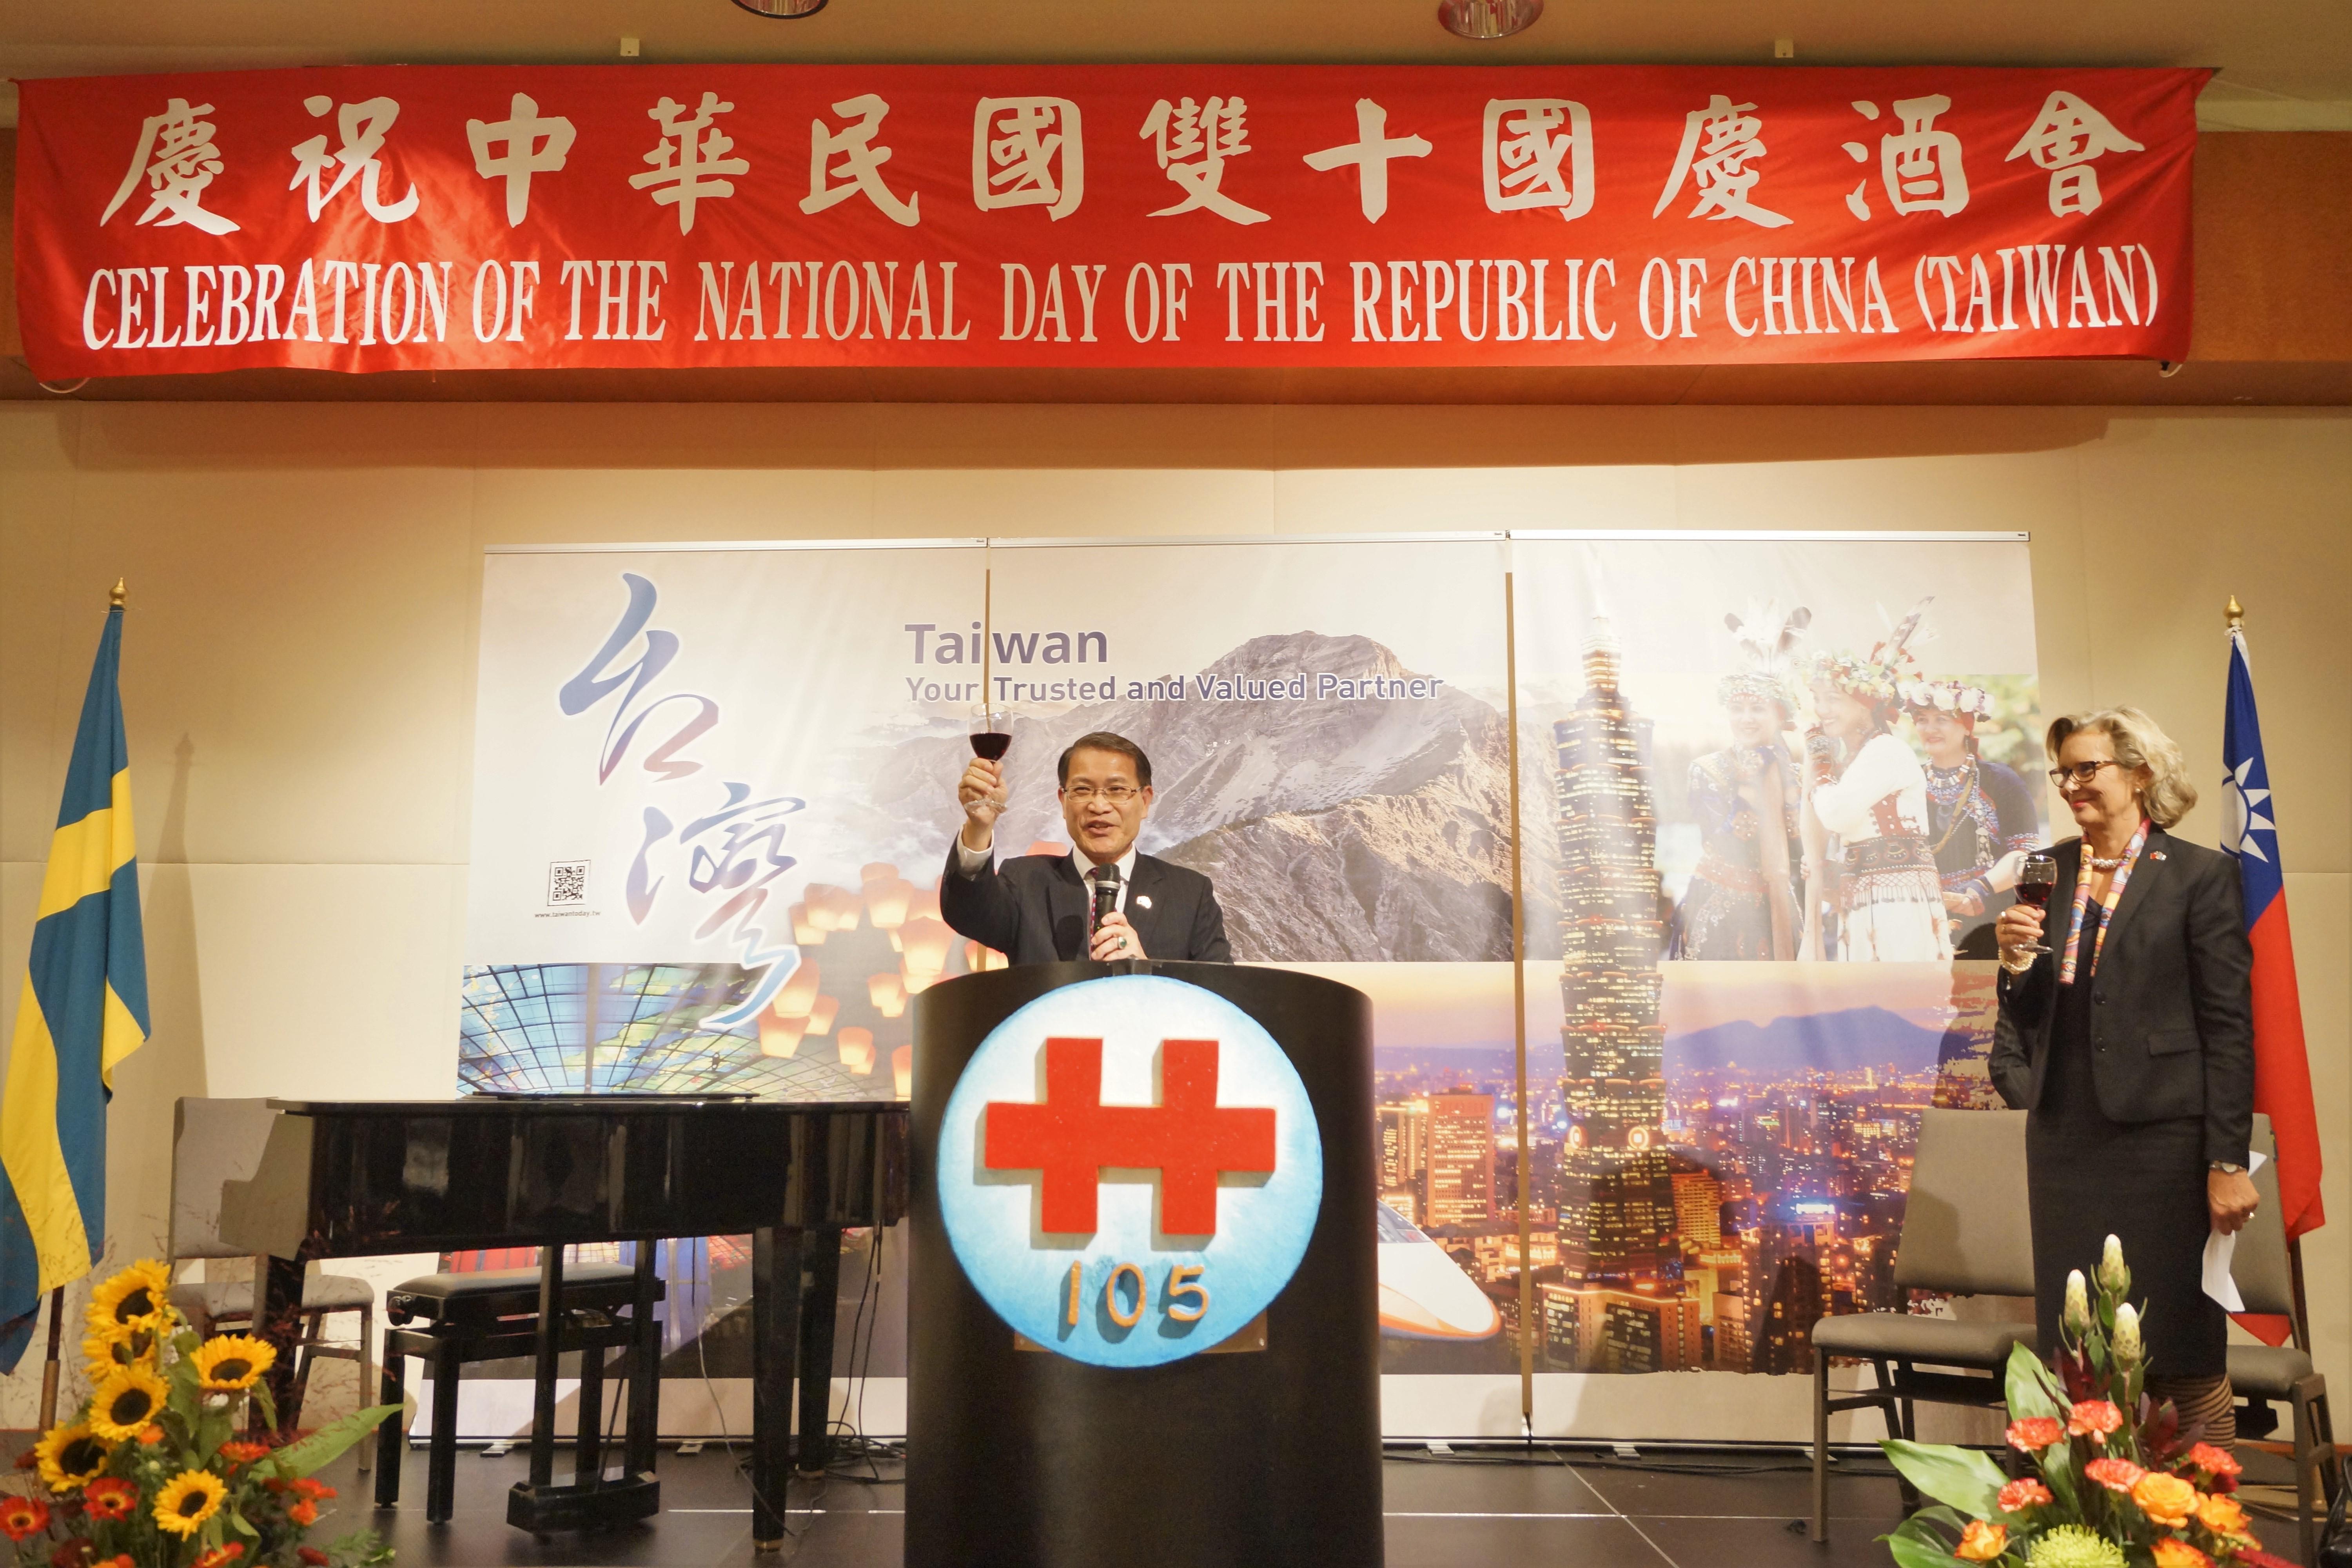 Ambassador Liao proposed a toast to the President of the Republic of China.